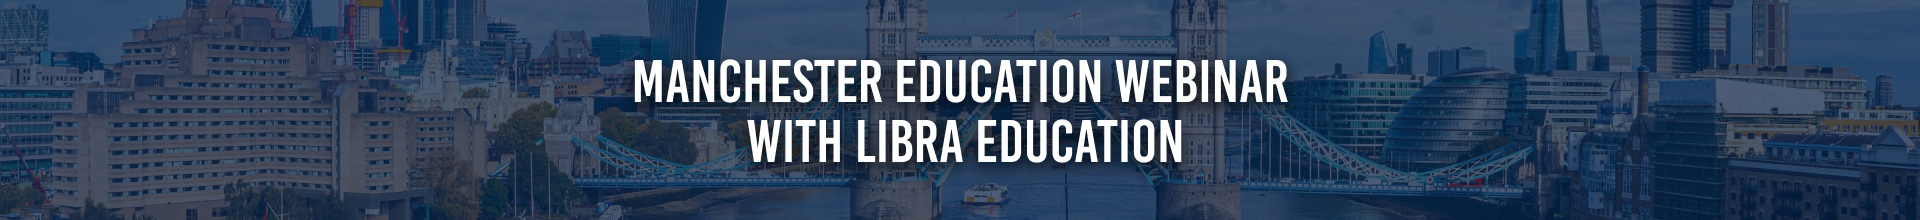 Manchester Education Webinar with Libra Education